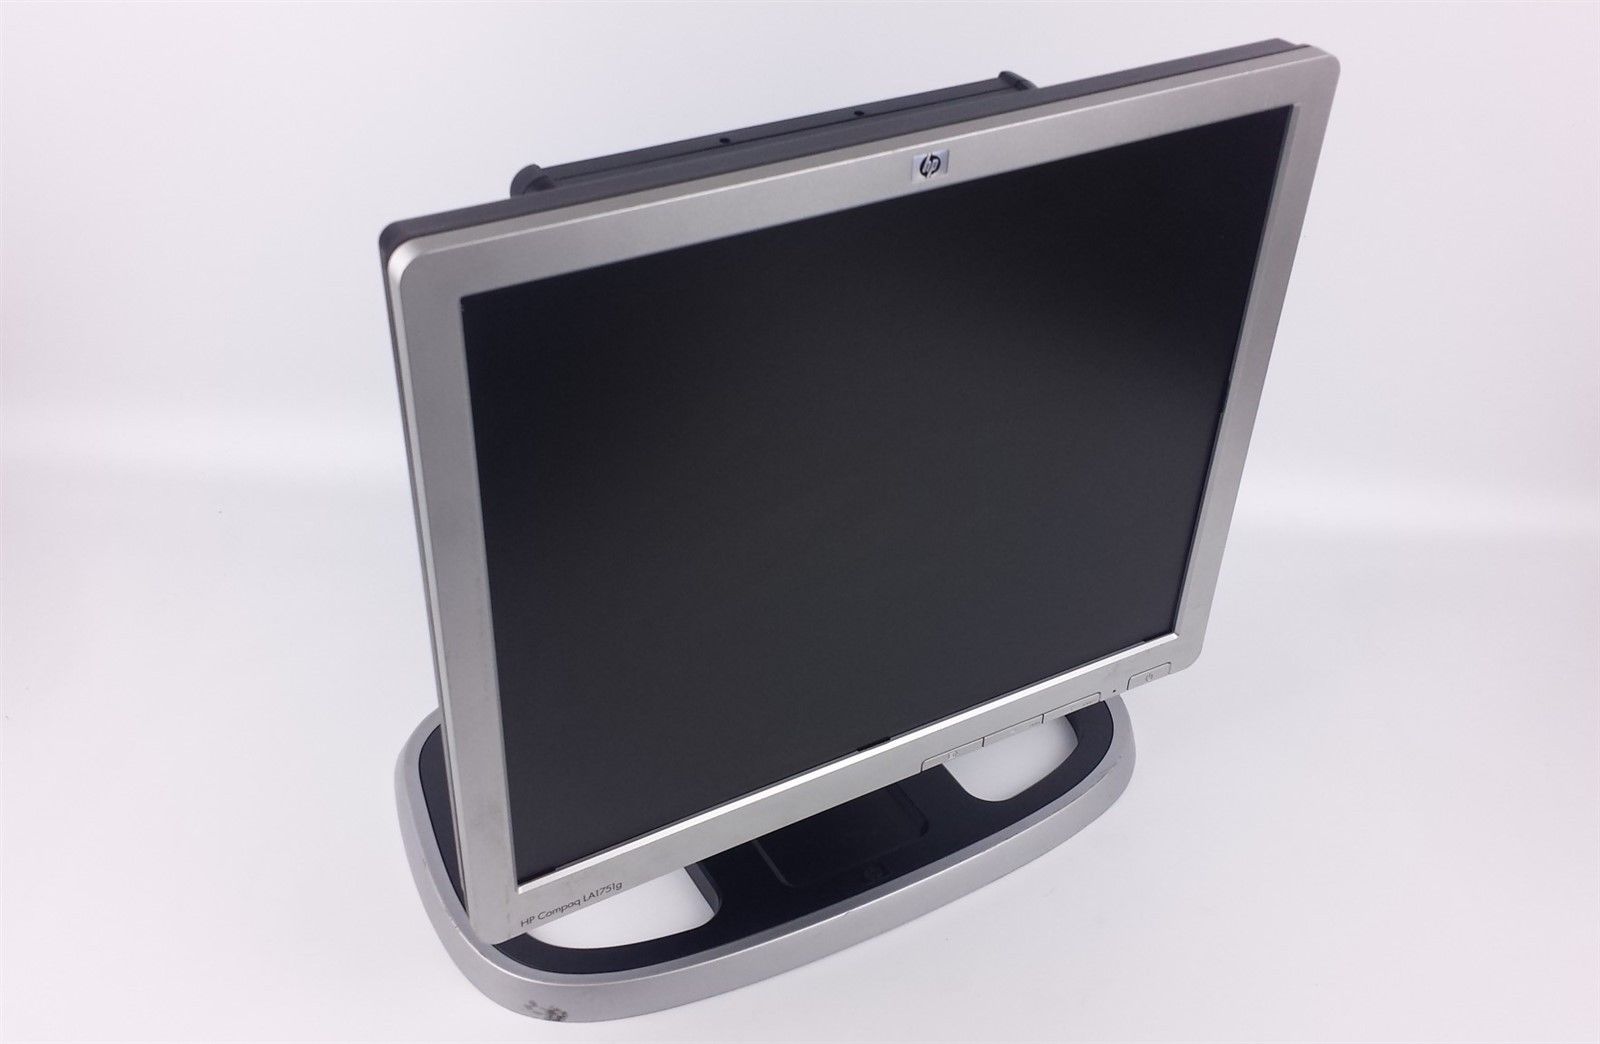 HP Compaq LA1751g Flat Screen LCD Computer Monitor 17" with Solid Stand